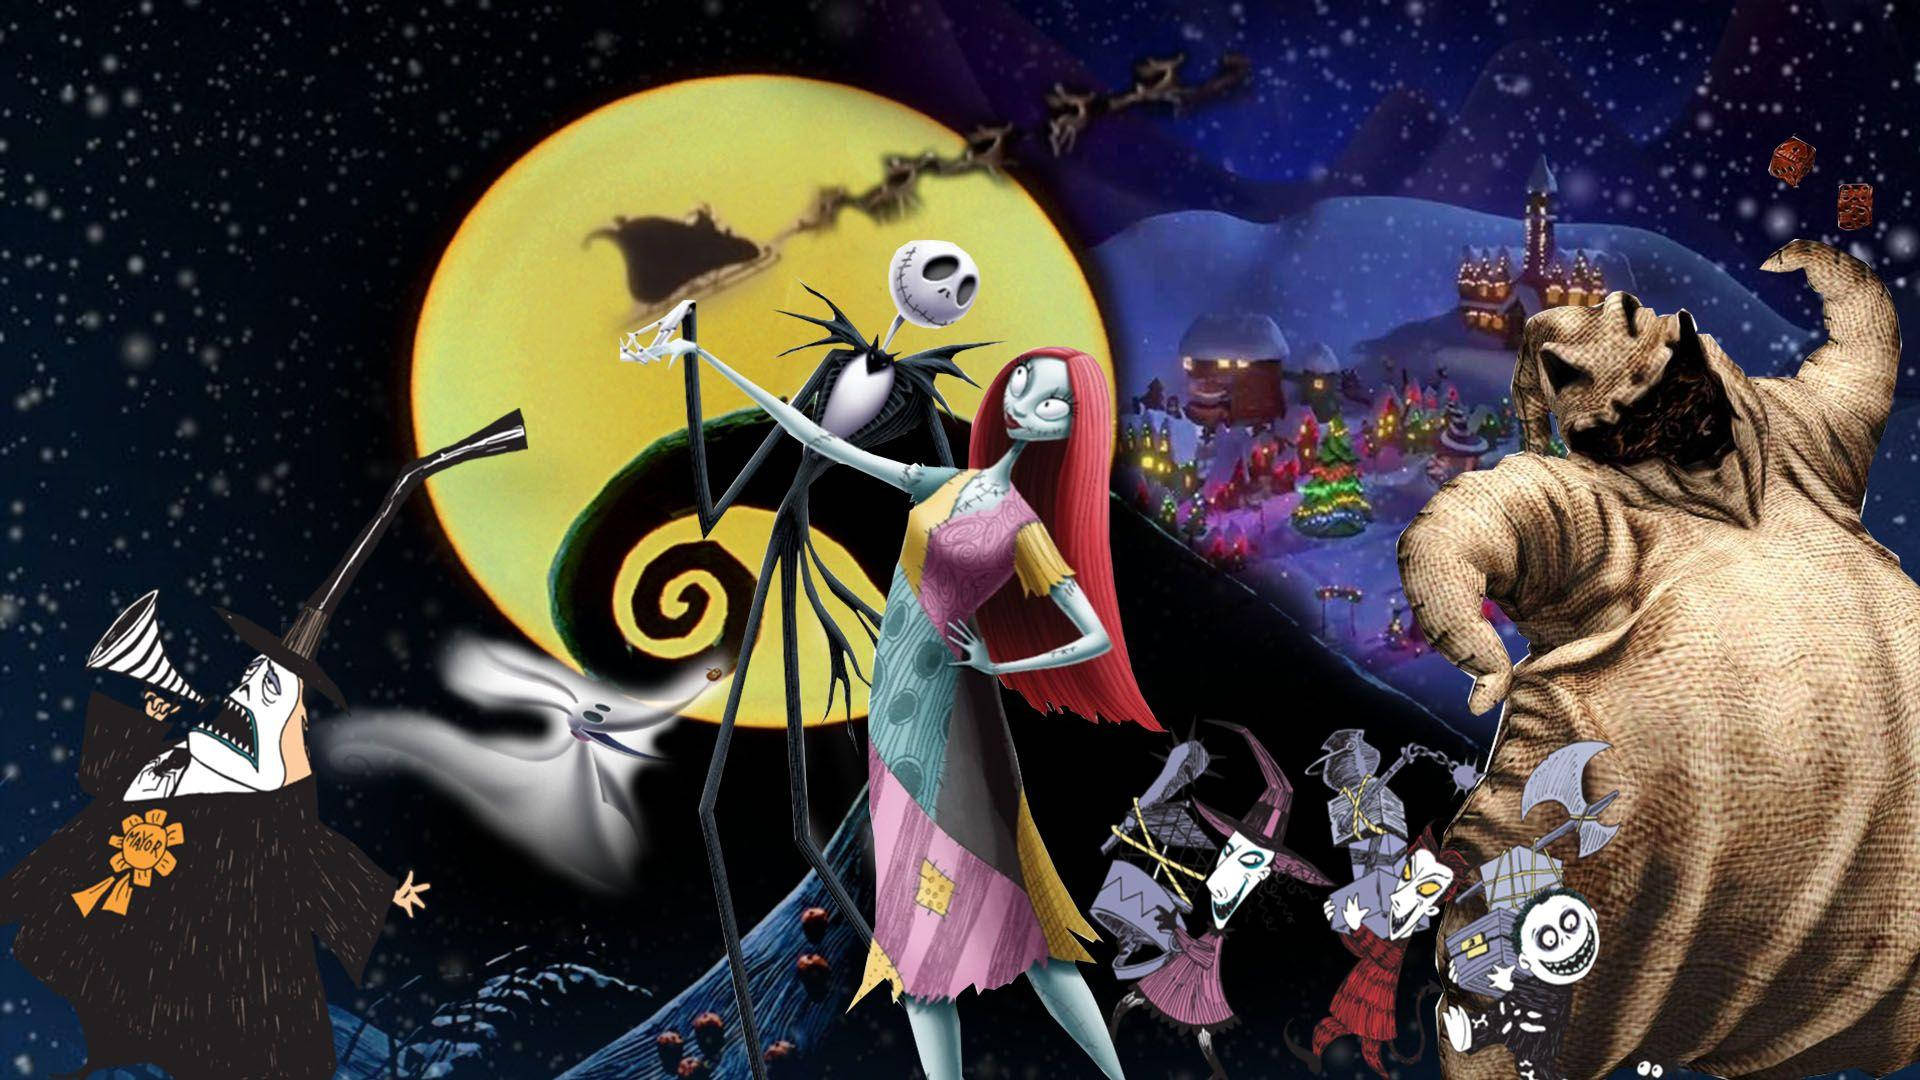 Mixed Art Styles The Nightmare Before Christmas